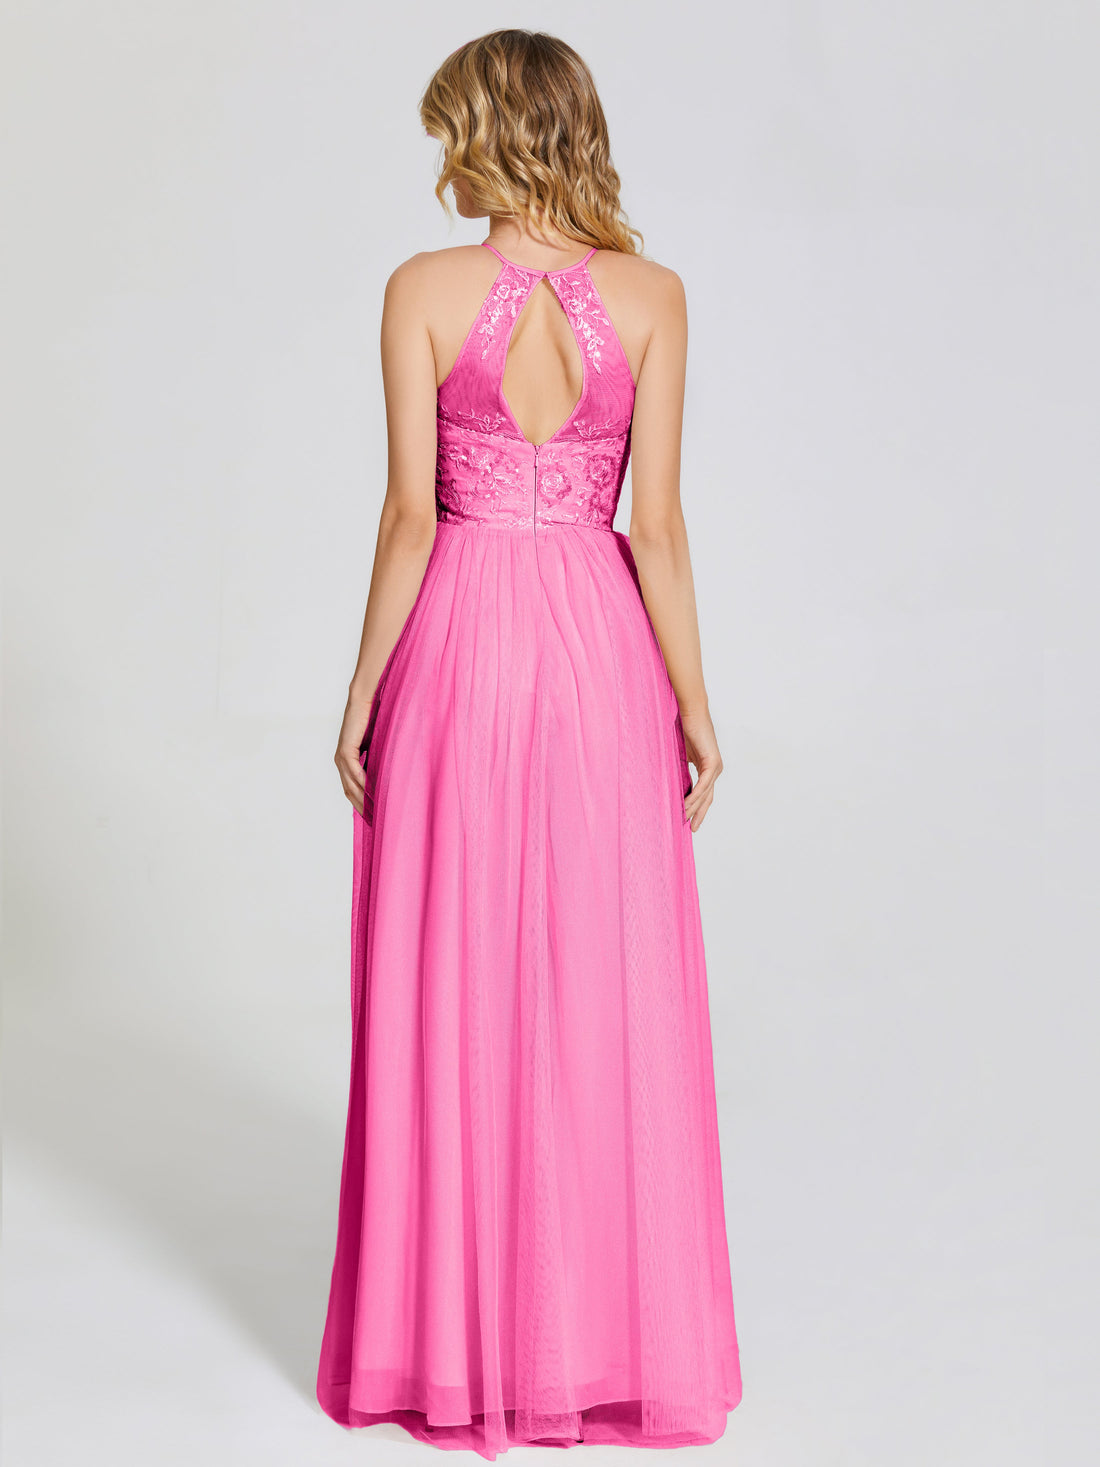 Destiny Halter Embroidered Tulle Bridesmaid Dresses